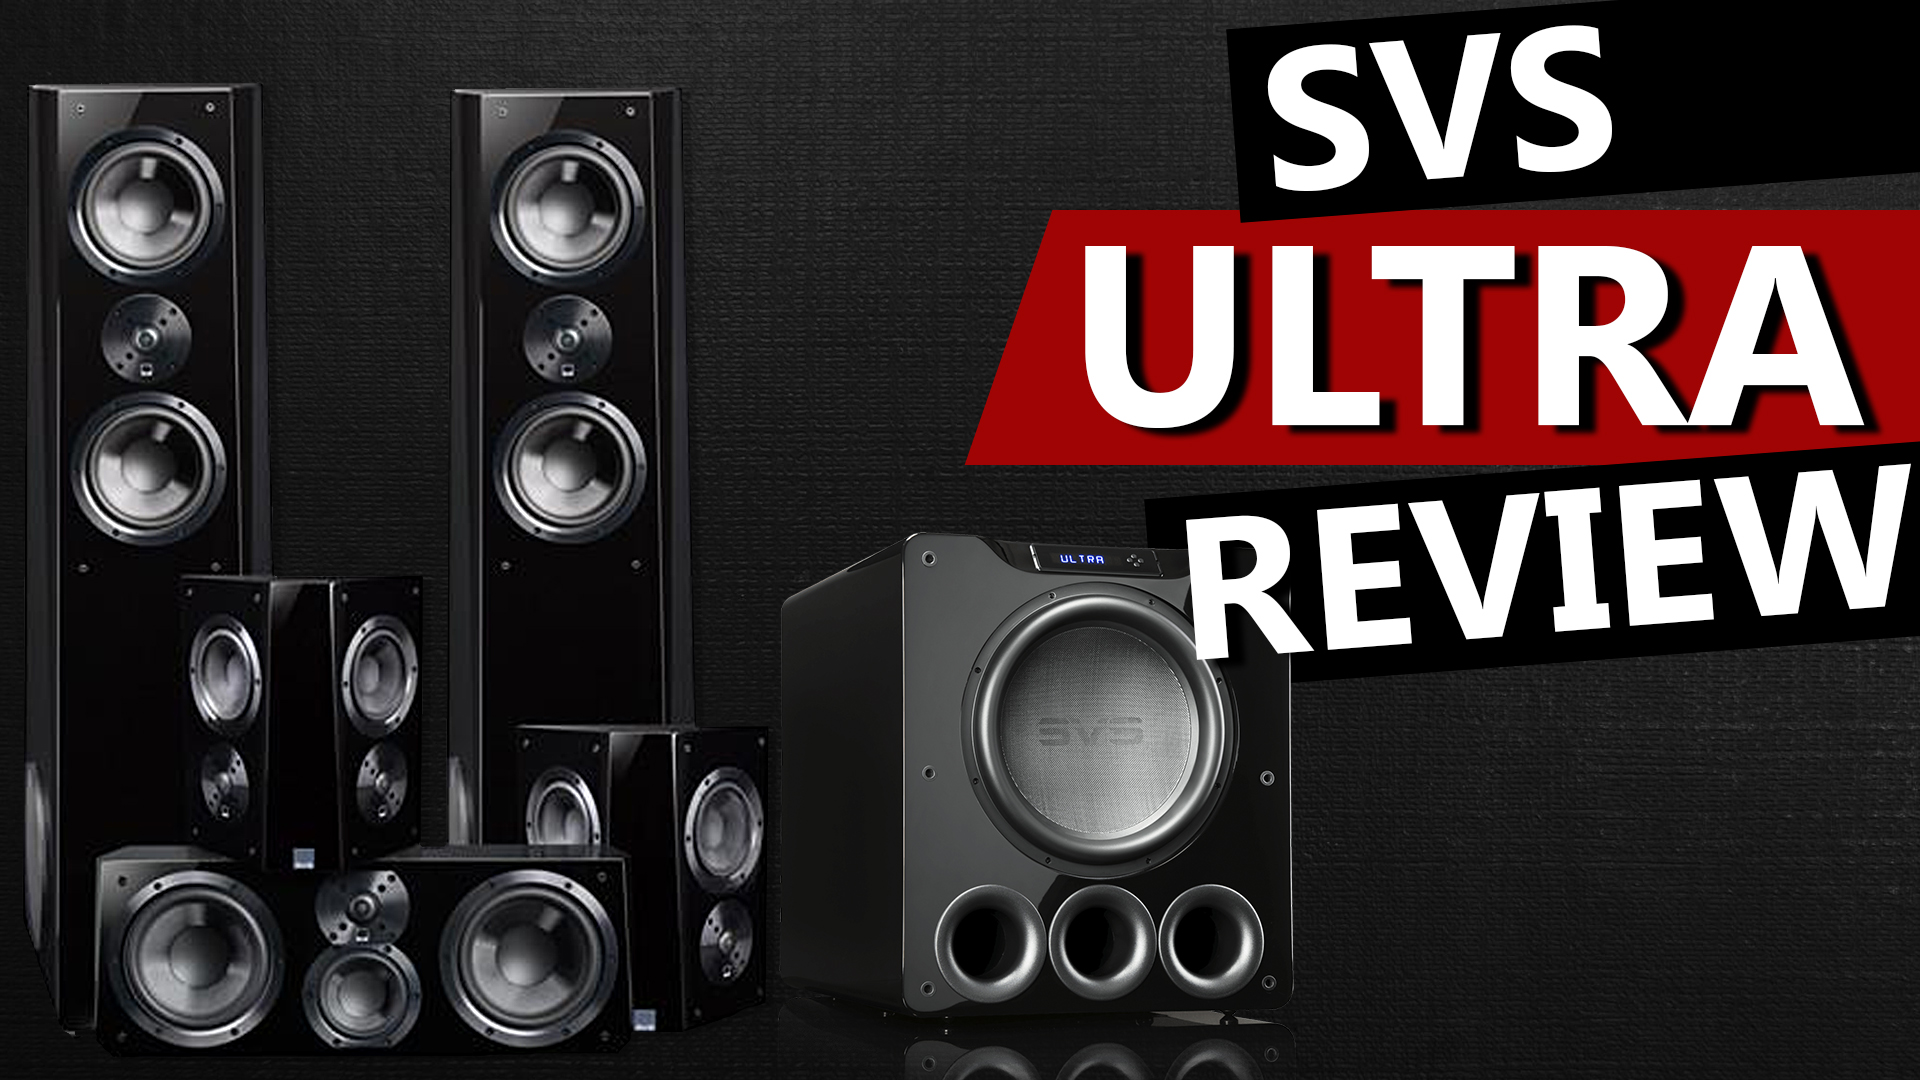 SVS Ultra Towers and Center Speaker Review